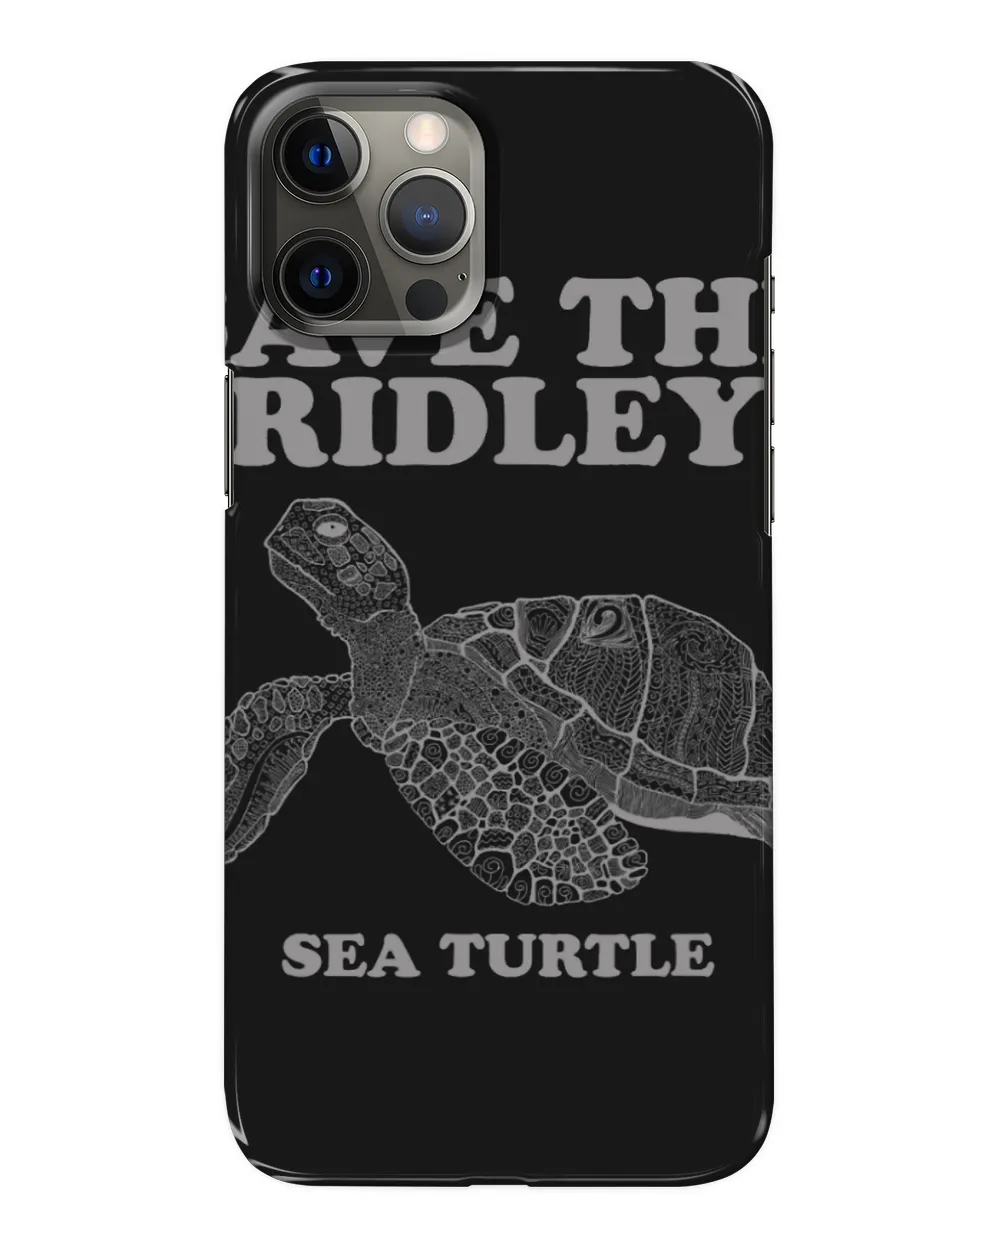 Turtle Gift Save The Ridley Sea Turtle 258 Turtles